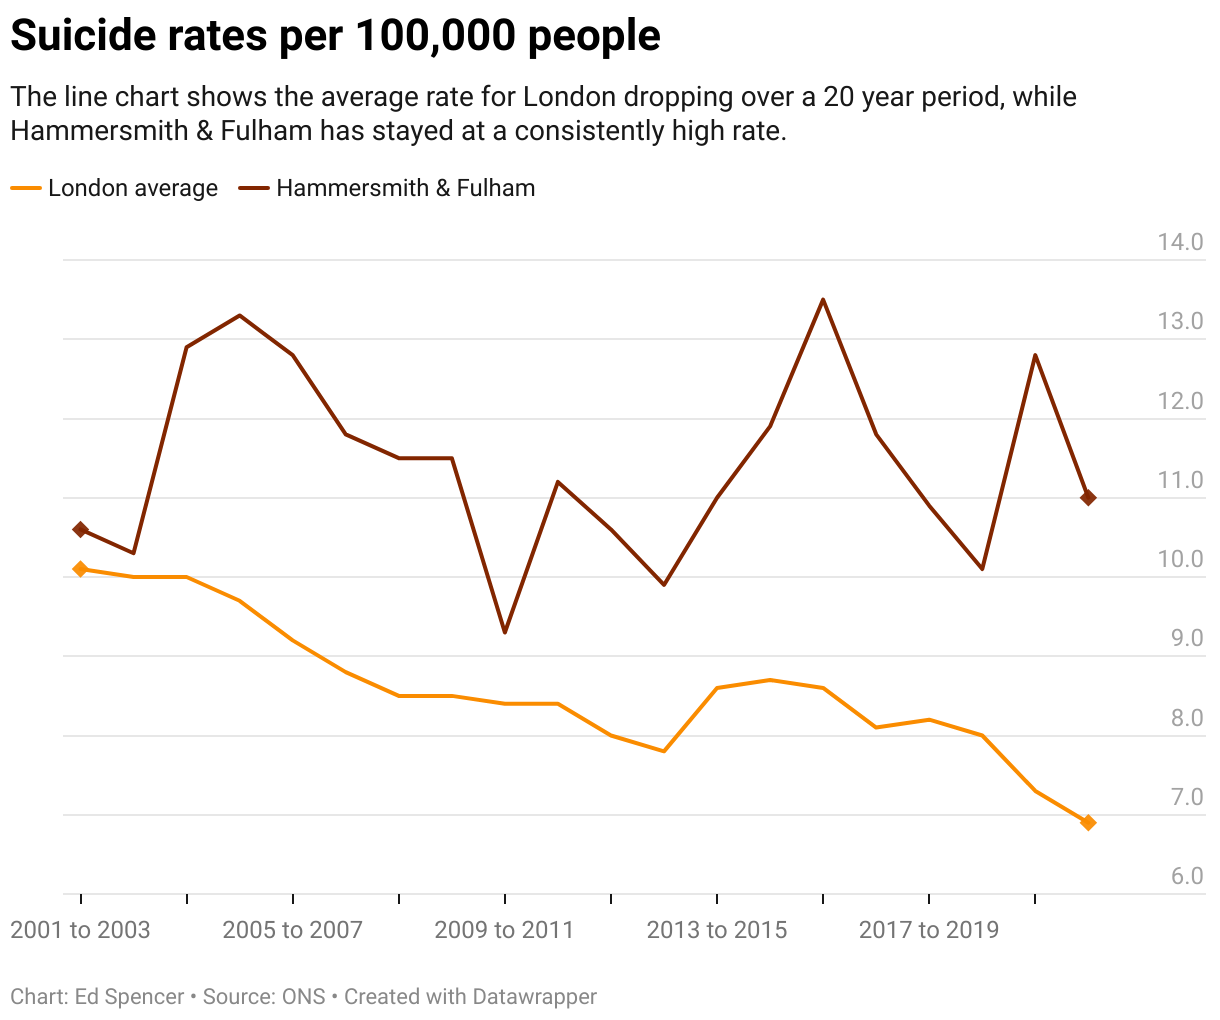 The line chart shows the average rate for London dropping over a 20 year period, while Hammersmith & Fulham has stayed at a consistently high rate.